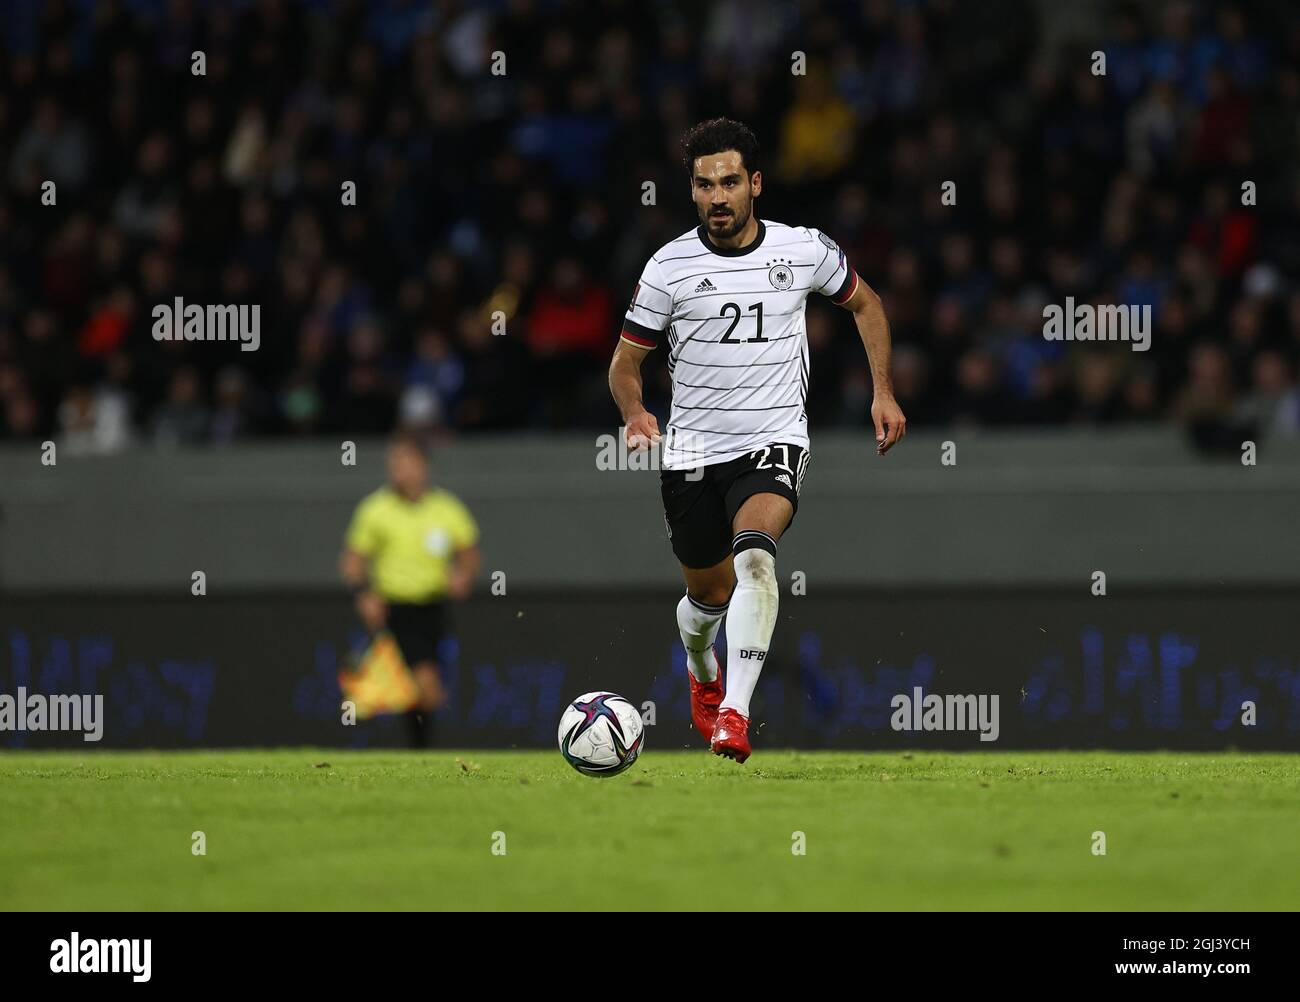 Reykjavik, Iceland. 08th Sep, 2021. Football: World Cup qualifying, Iceland - Germany, Group stage, Group J, Matchday 6 at Laugardalsvöllur stadium. ·lkay Gündo·an drives the ball. Credit: Christian Charisius/dpa/Alamy Live News Stock Photo